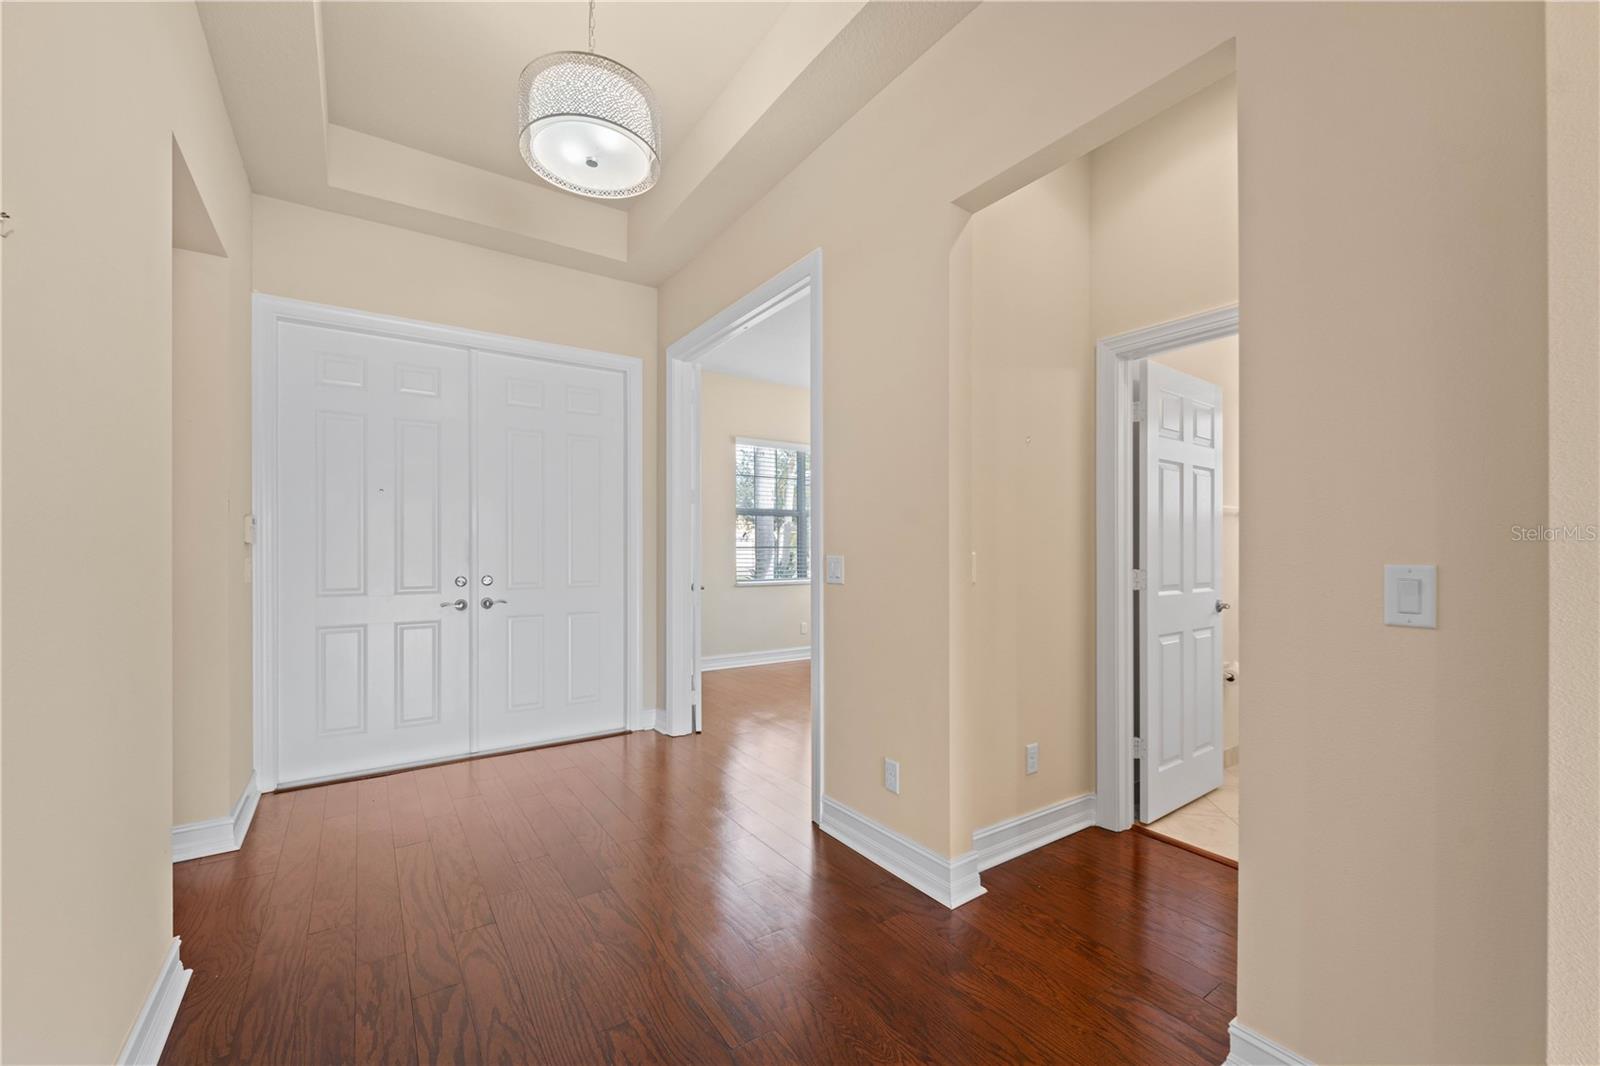 Double entry doors and foyer